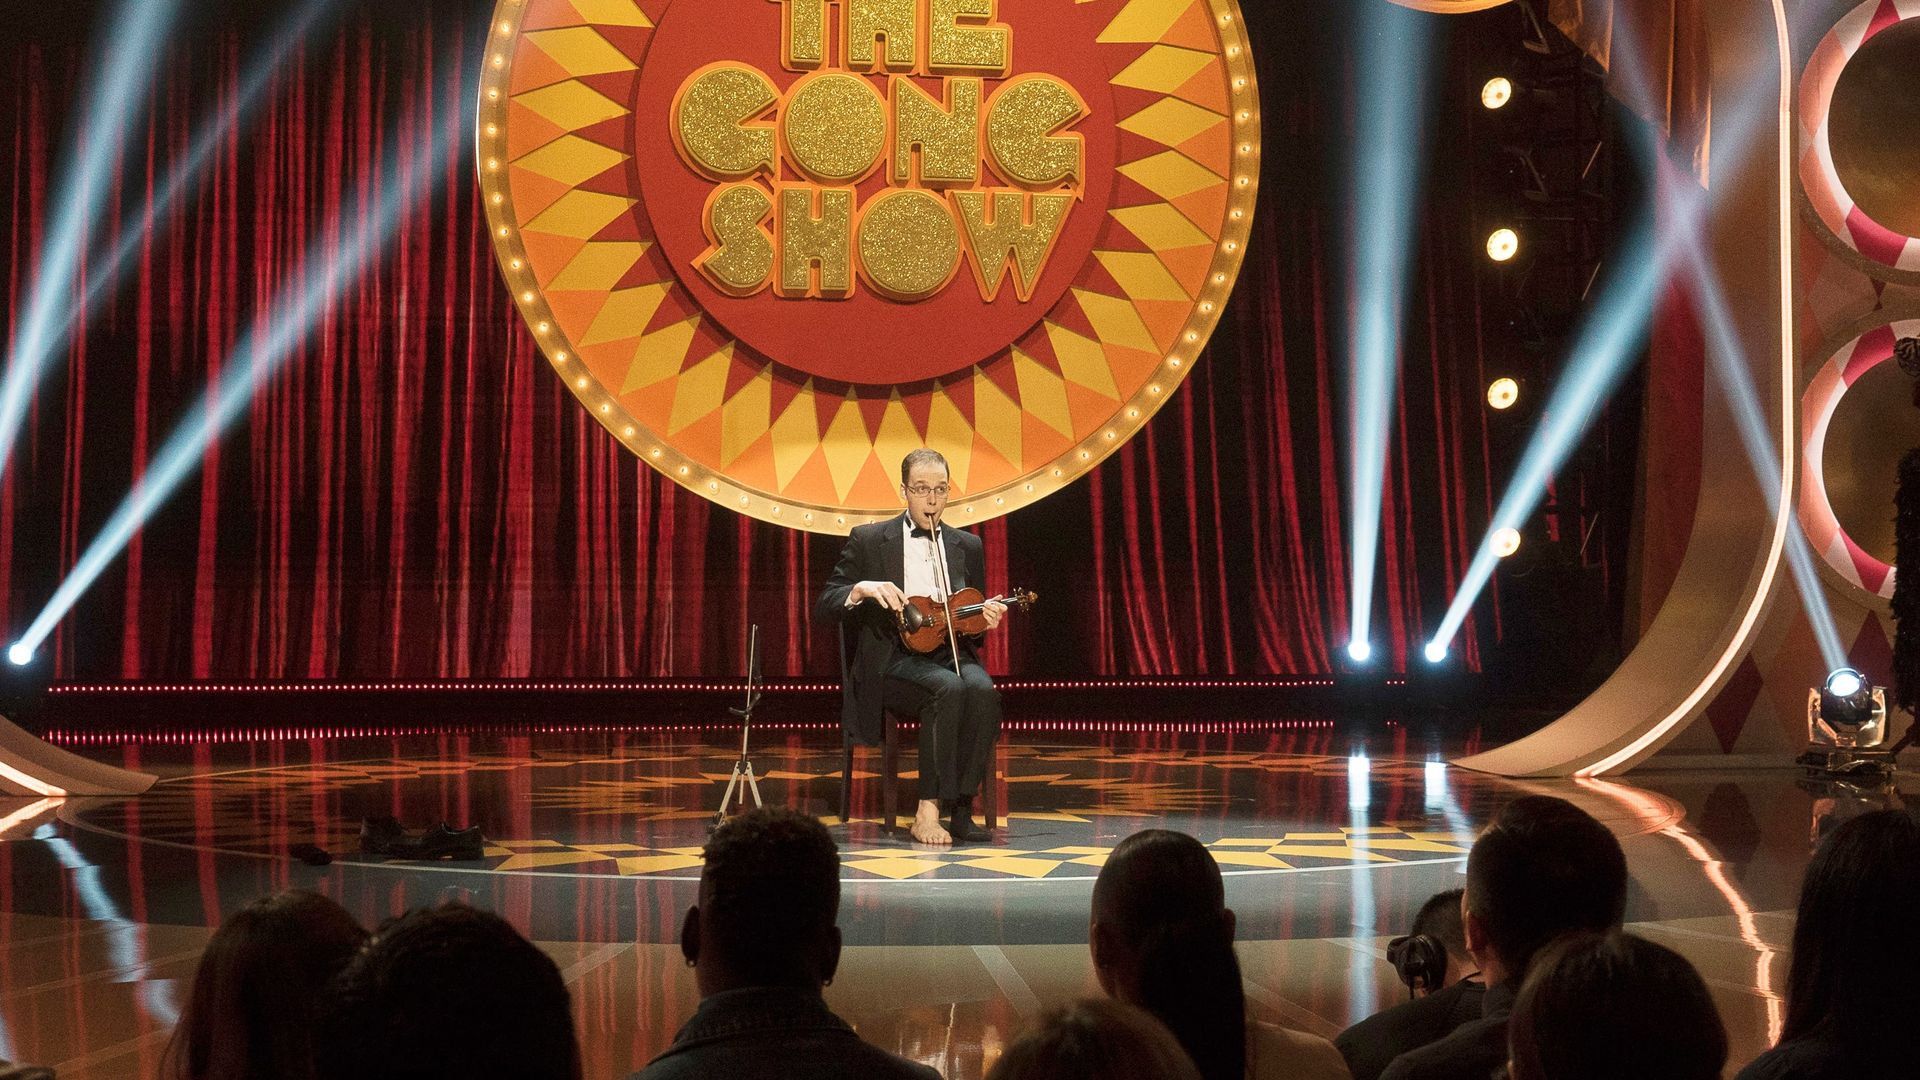 The Gong Show background